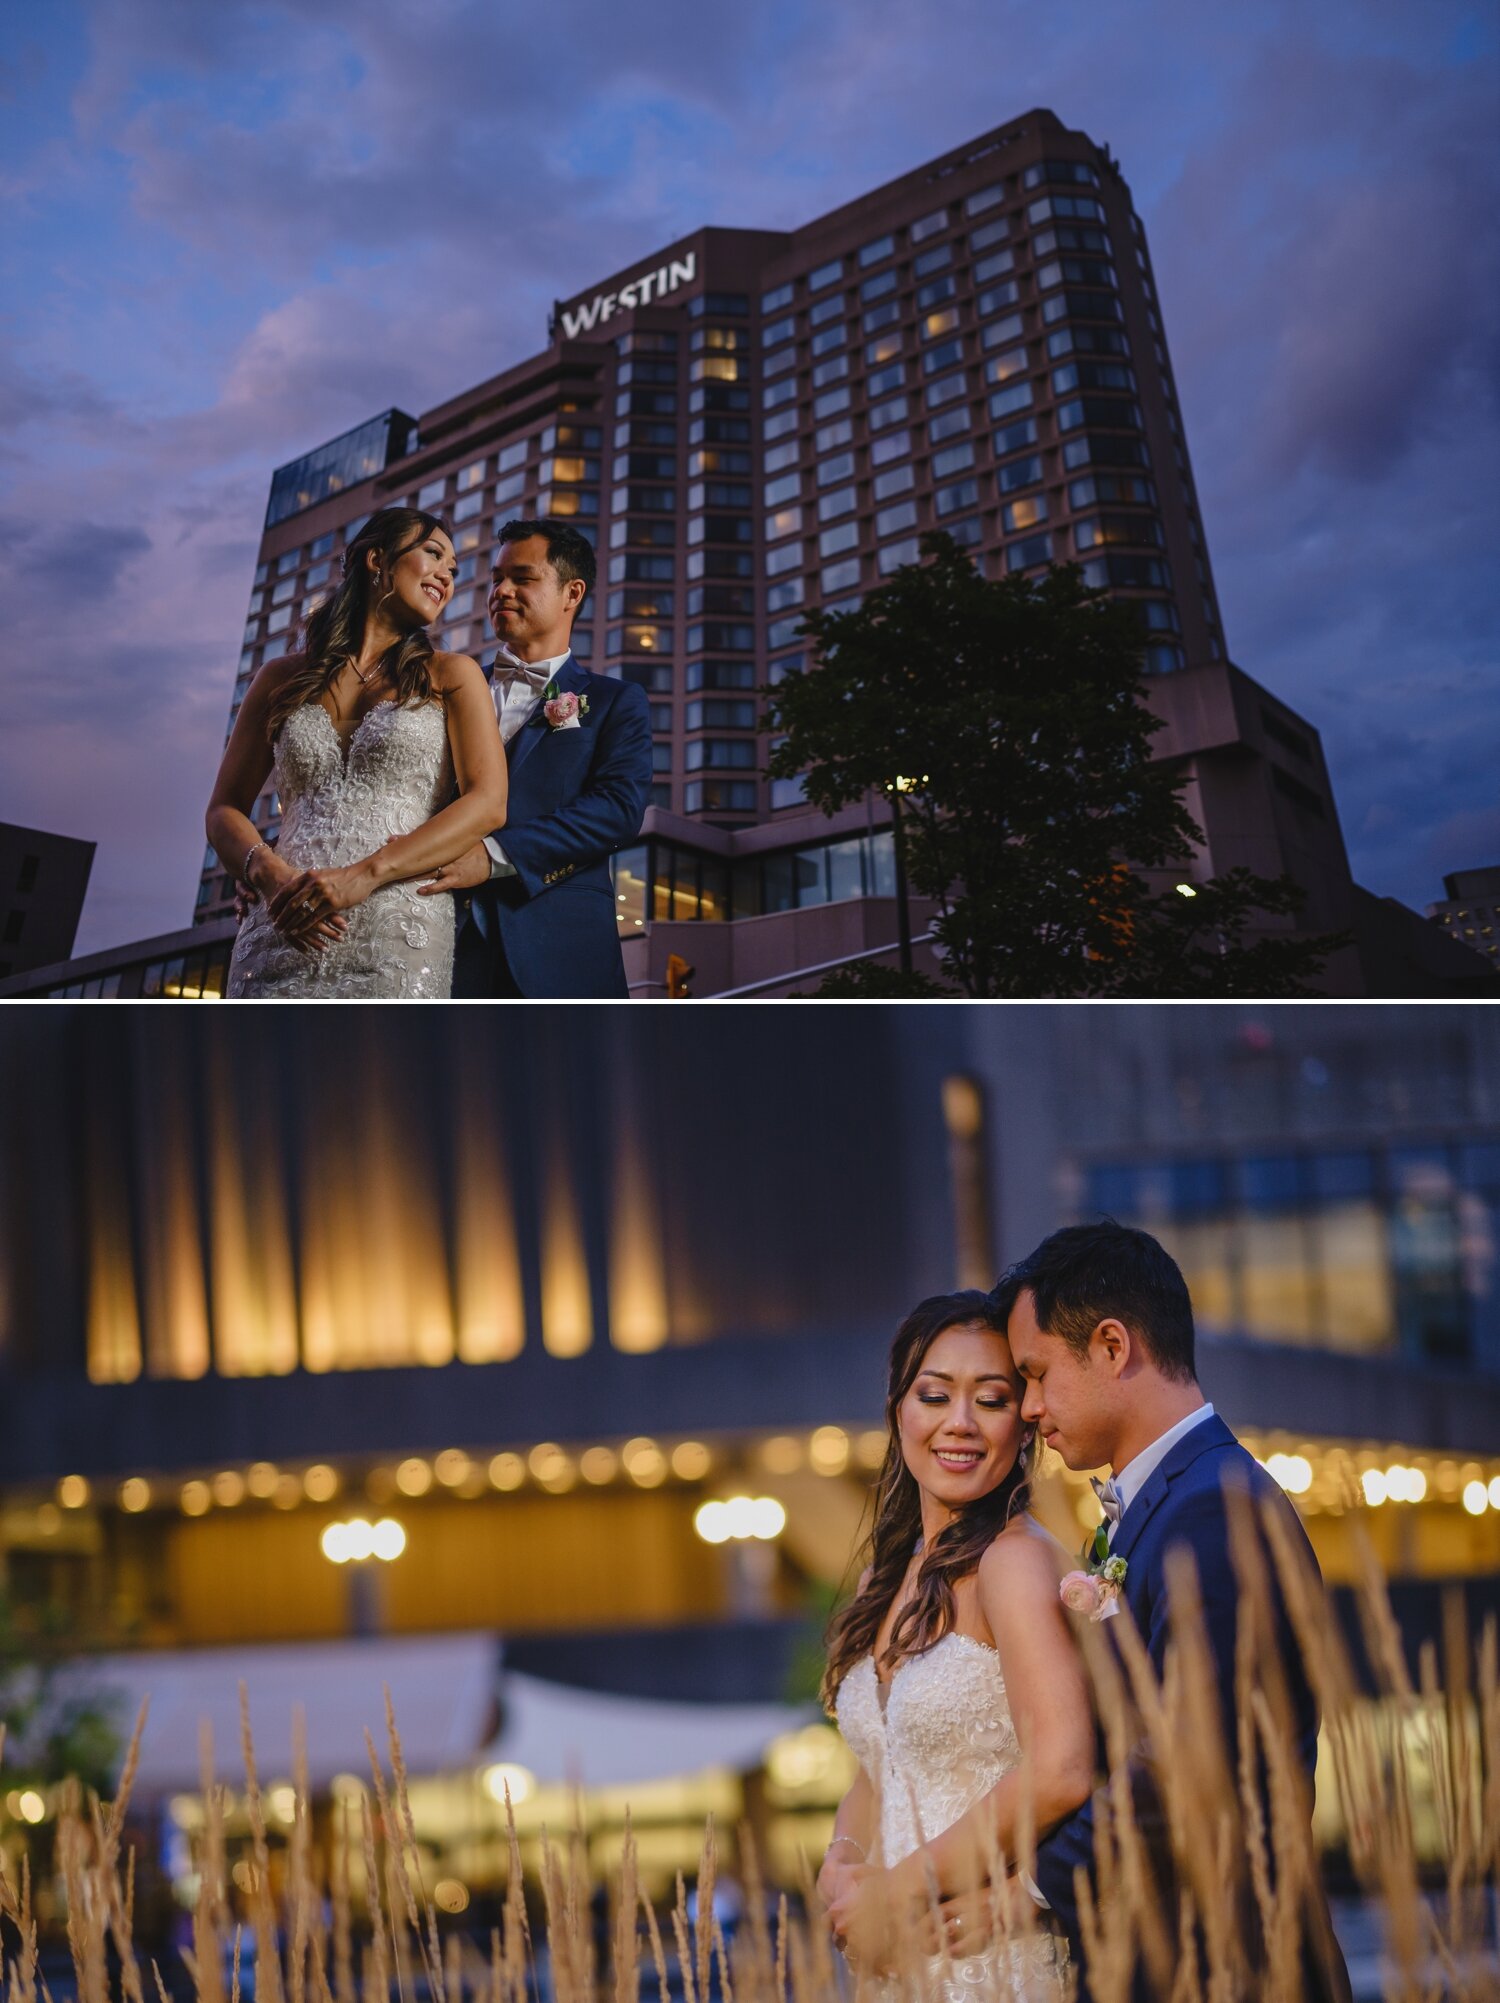 nighttime portraits of the bride and groom at a venue twenty two wedding reception at the westin ottawa ontario